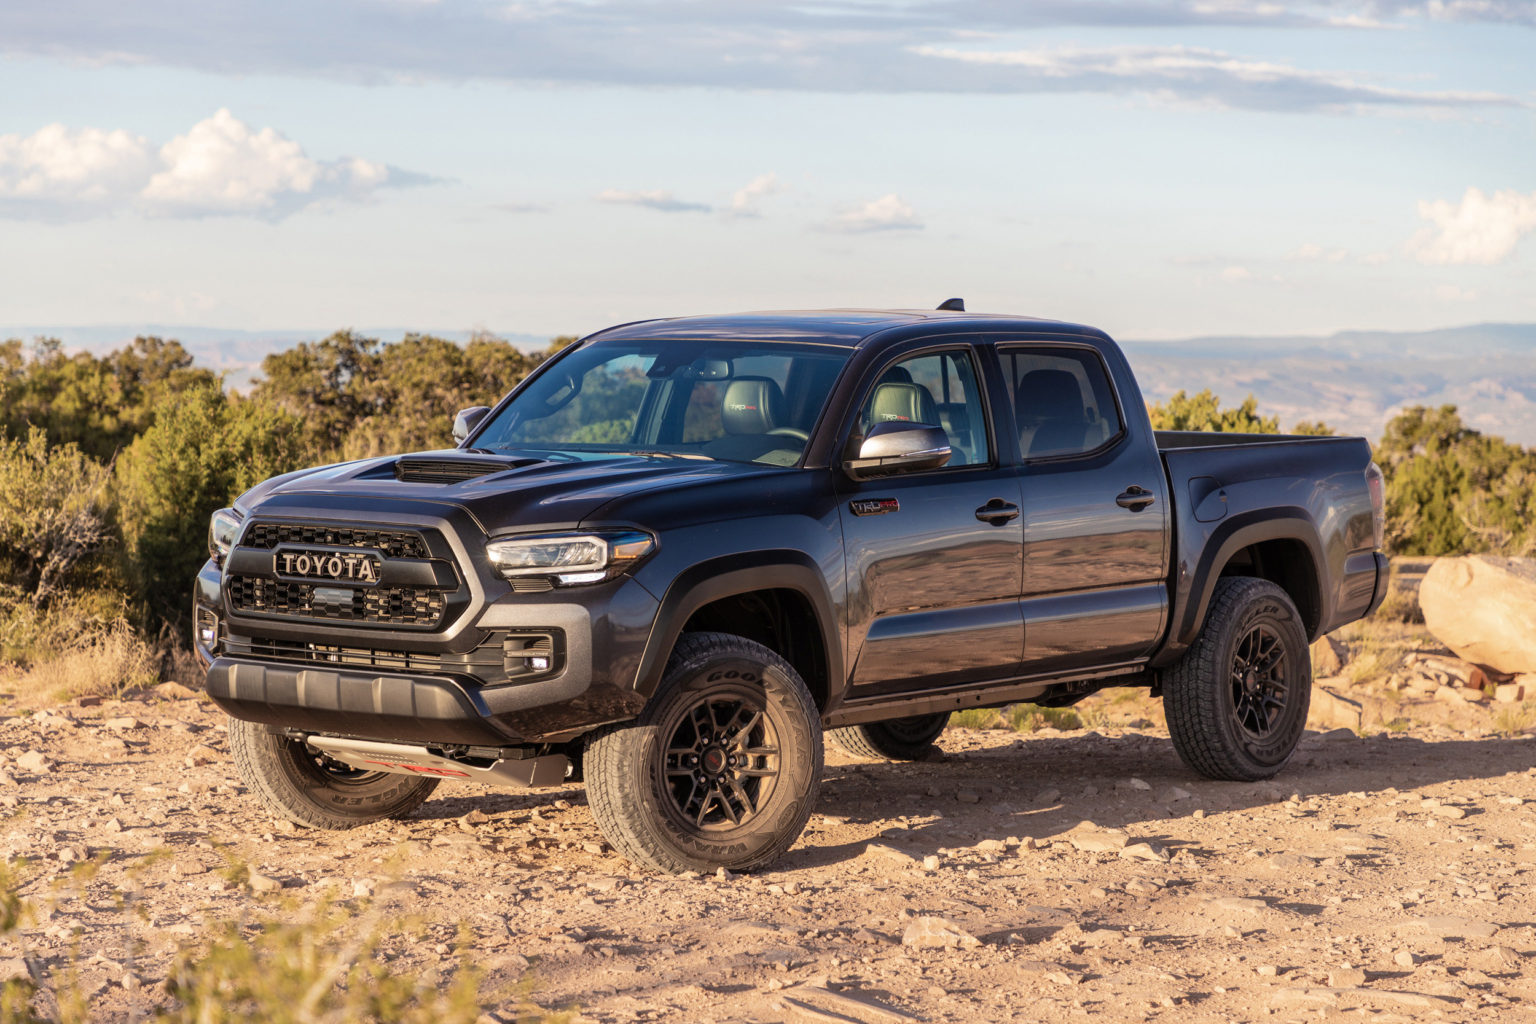 The Toyota Tacoma has been significantly upgraded for the 2020 model year.